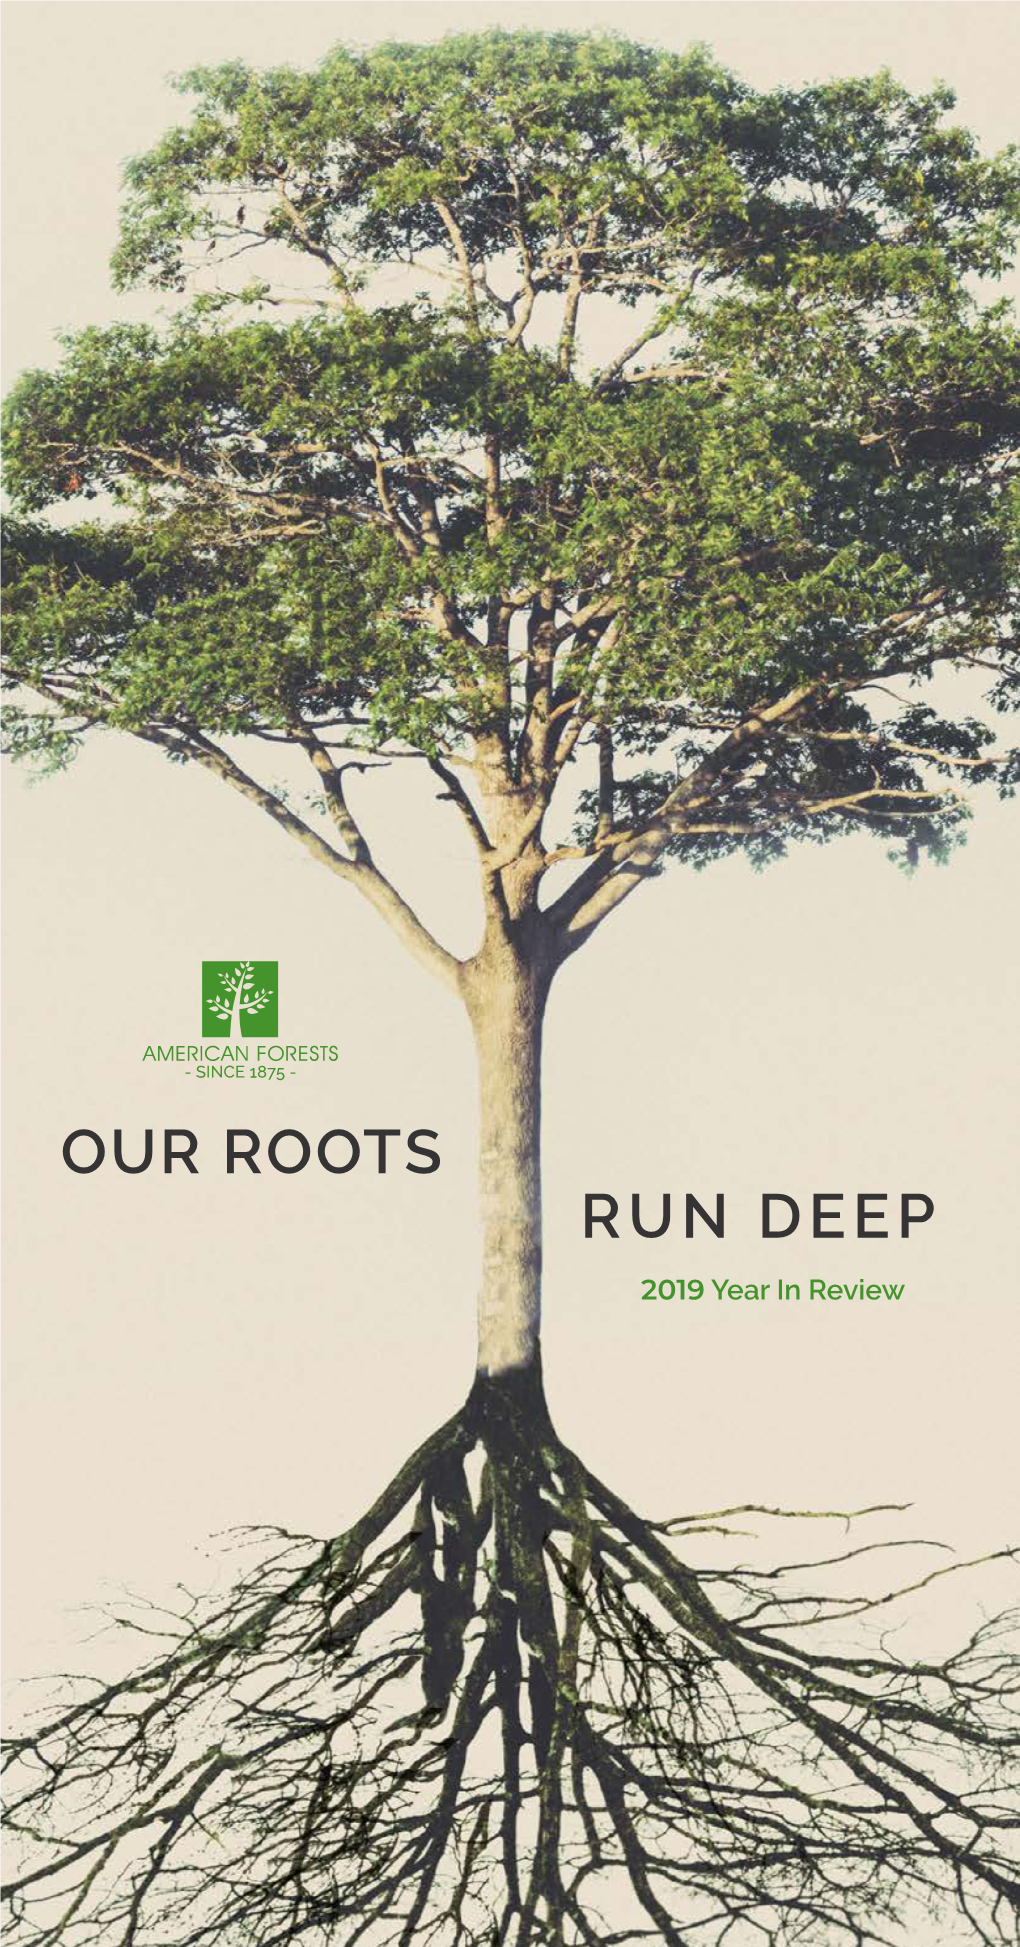 OUR ROOTS RUN DEEP 2019 Year in Review AMERICAN FORESTS’ IMPACT